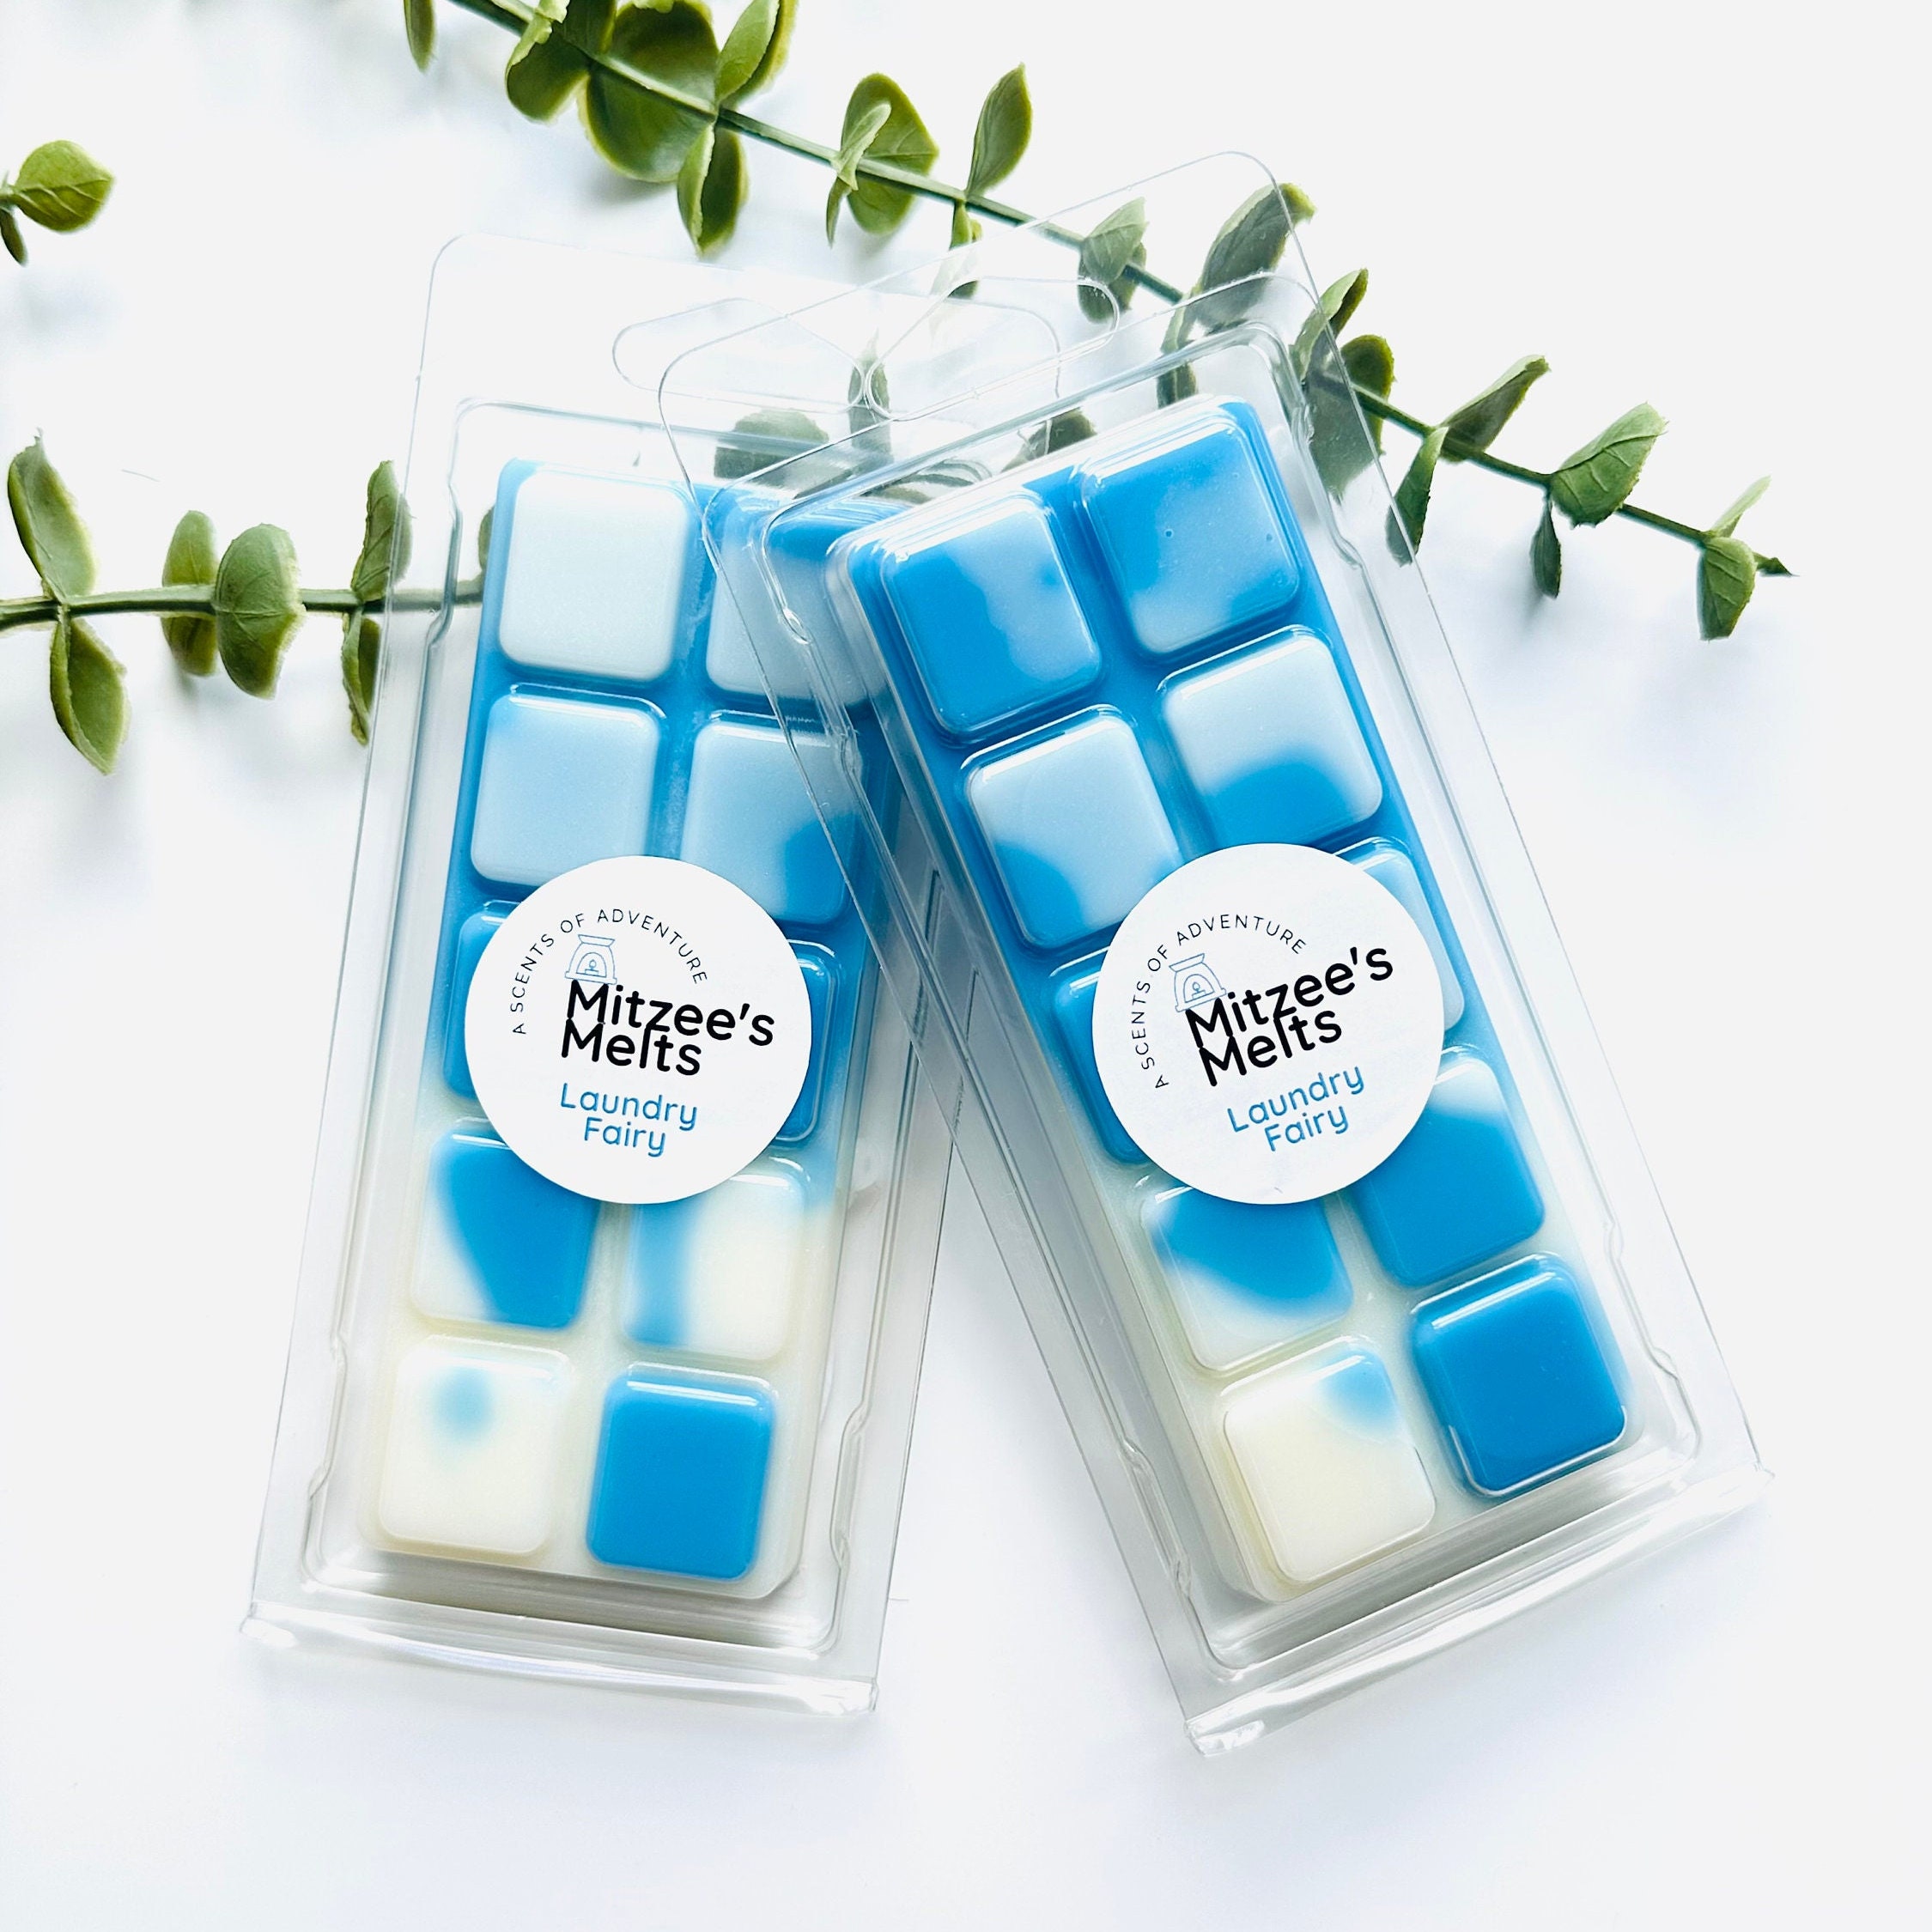 UN STOPABLES WAX WAX MELTS Product description Original Version Honey, we  already know you're unstoppable and your scented wax melt air fresheners  should be too. That's why you shouldn't settle for anything